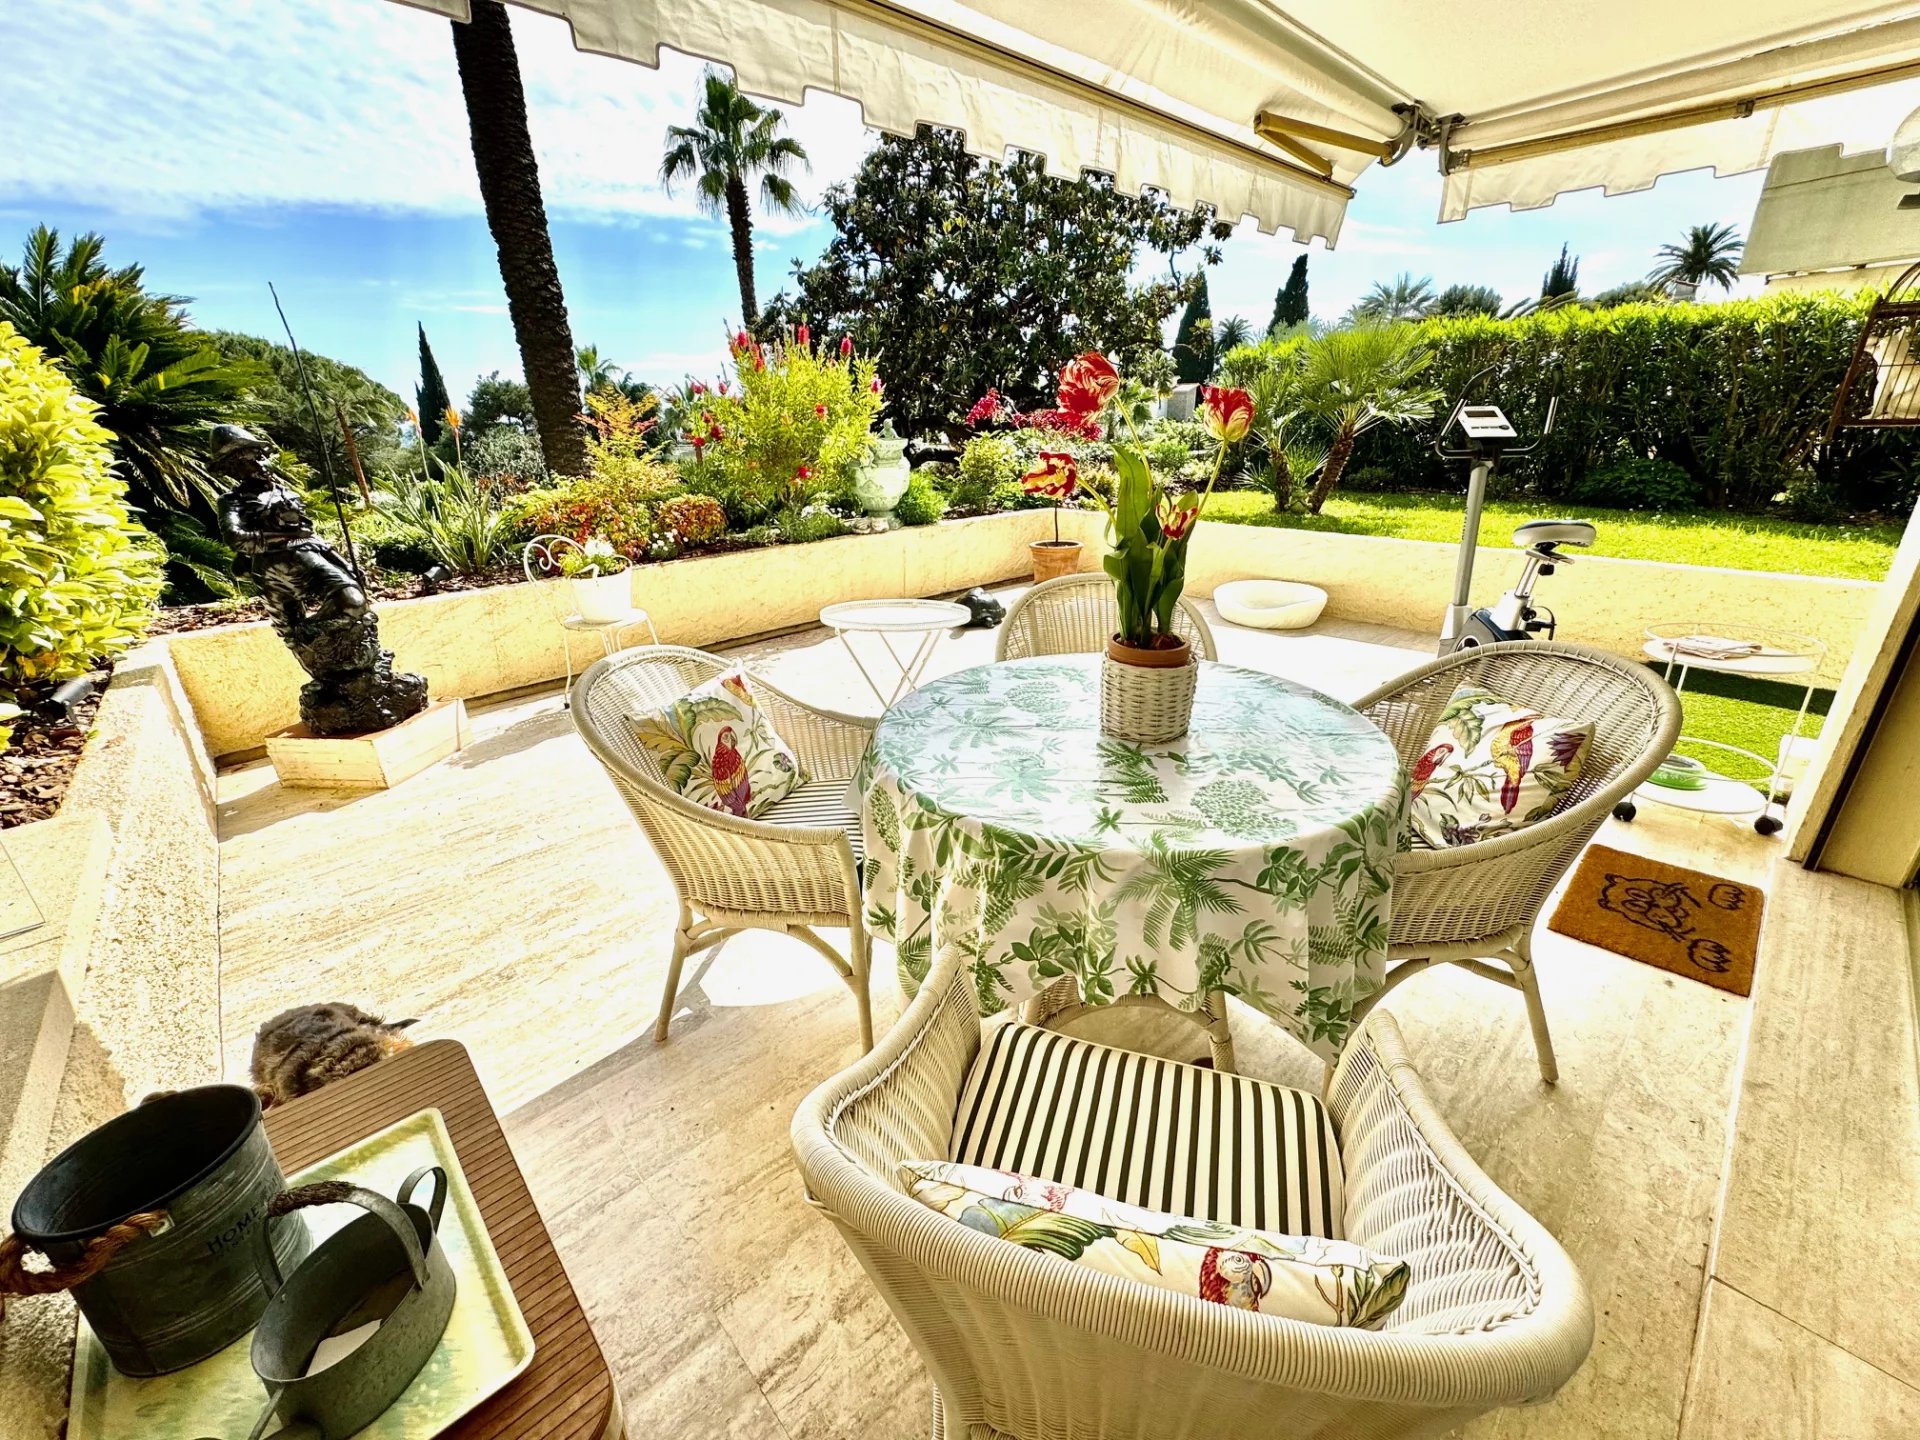 CANNES FOR SALE 2 bedrooms appartment garden, swimming pool